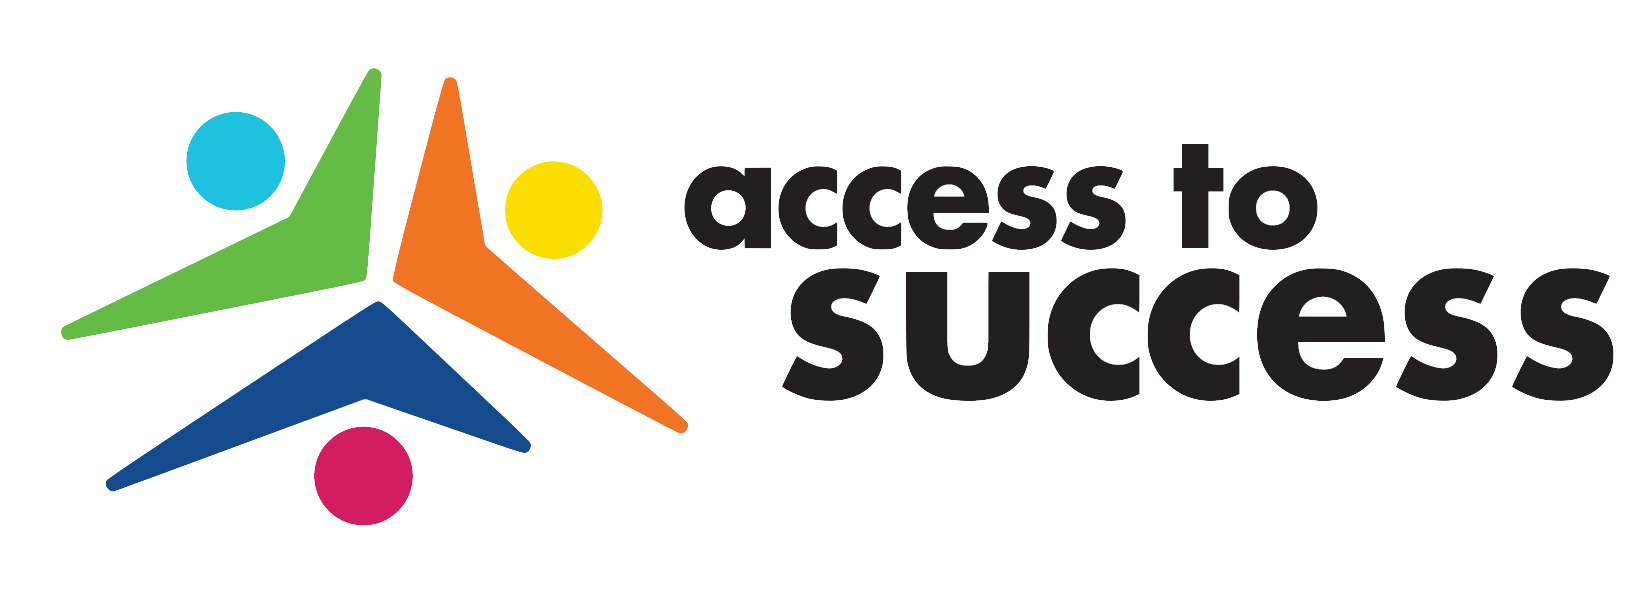 Access to Success